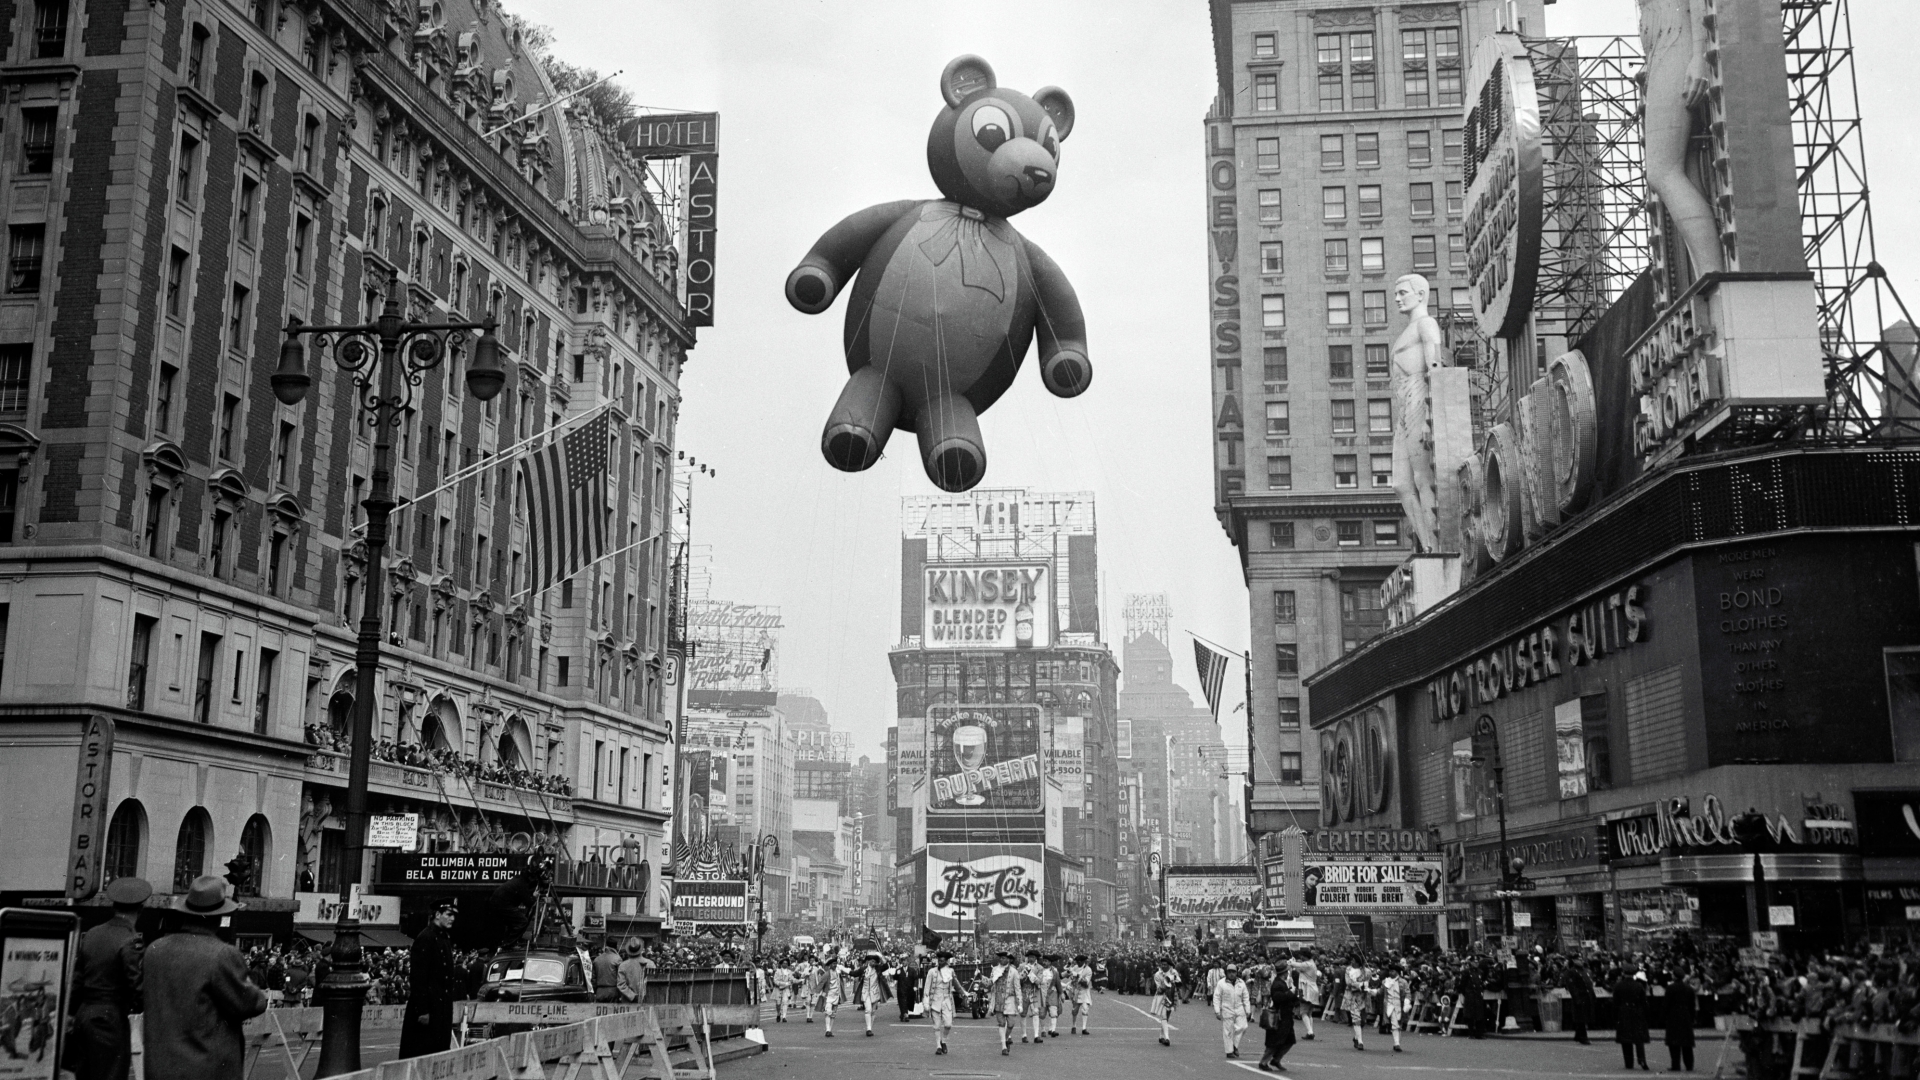 Facts About The Macy's Thanksgiving Day Parade That You'll Gobble Up